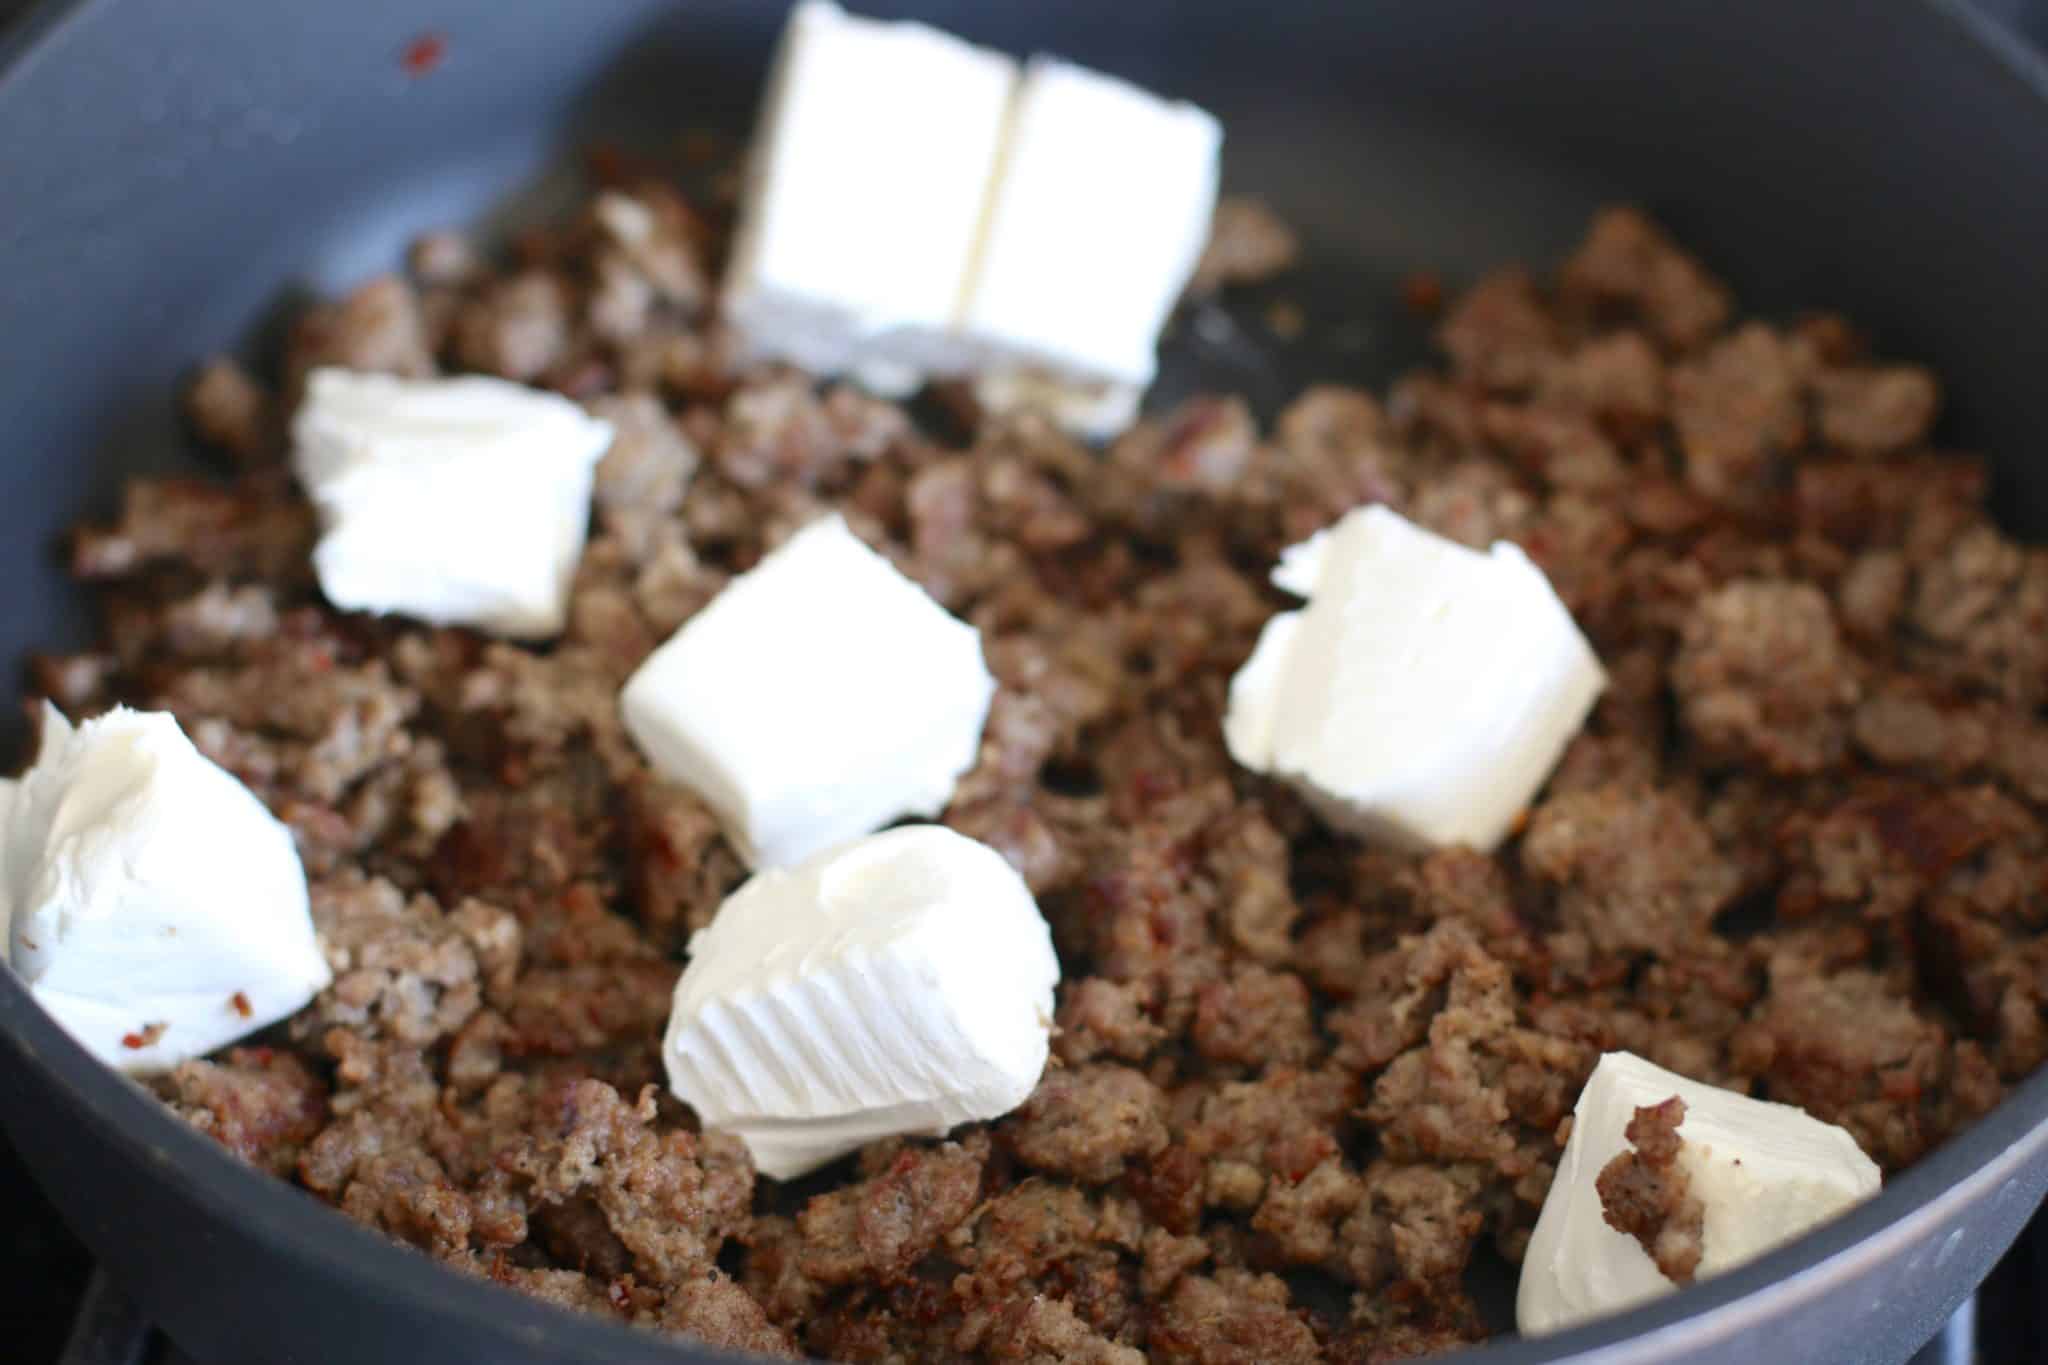 cubed cream cheese and cooked sausage in skillet.